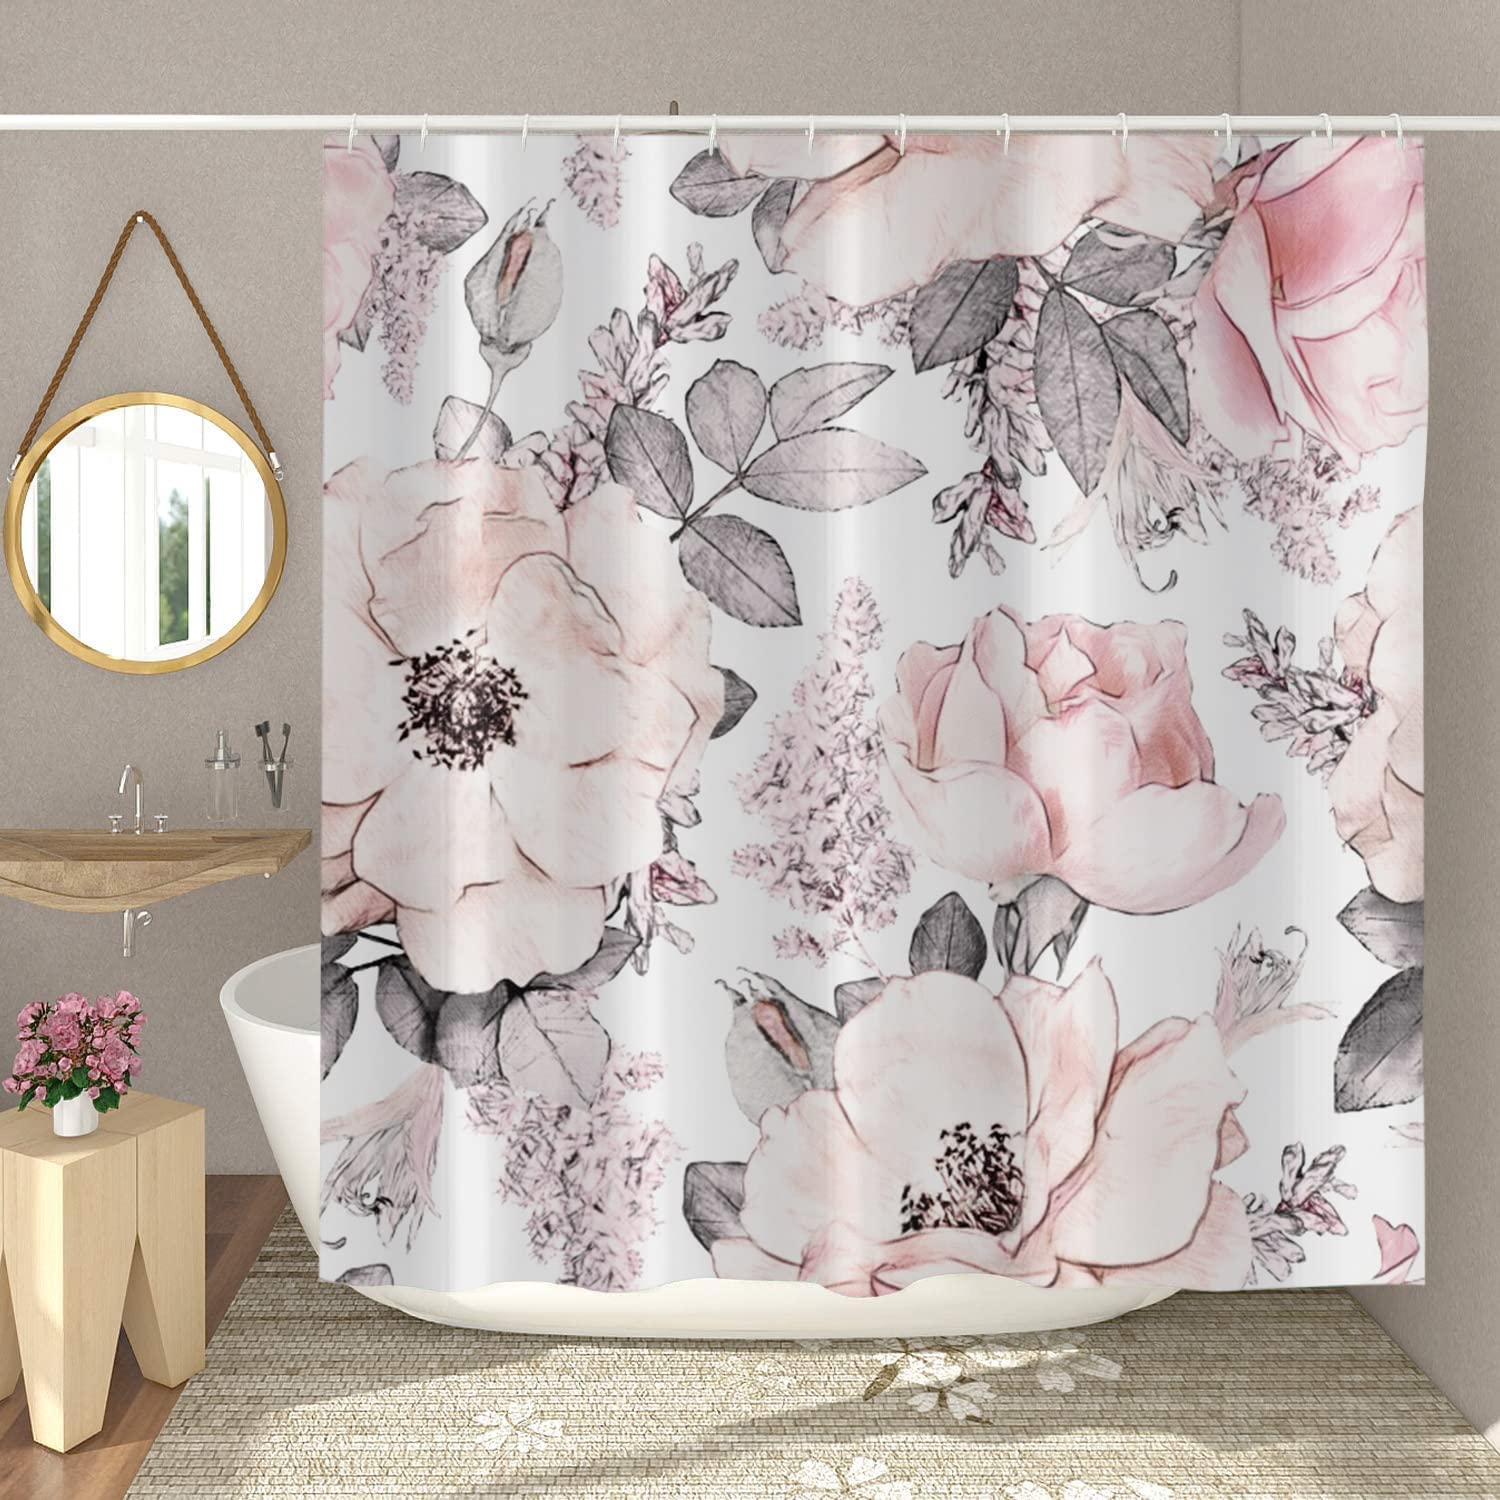 Pink Floral Shower Curtain, Pink and Grey Watercolor Rose Blossom Ink Painting Art Bathroom Curtain for Spring Bathtub Home Decor Waterproof Fabric Machine Washable with 12 Hooks - image 2 of 6